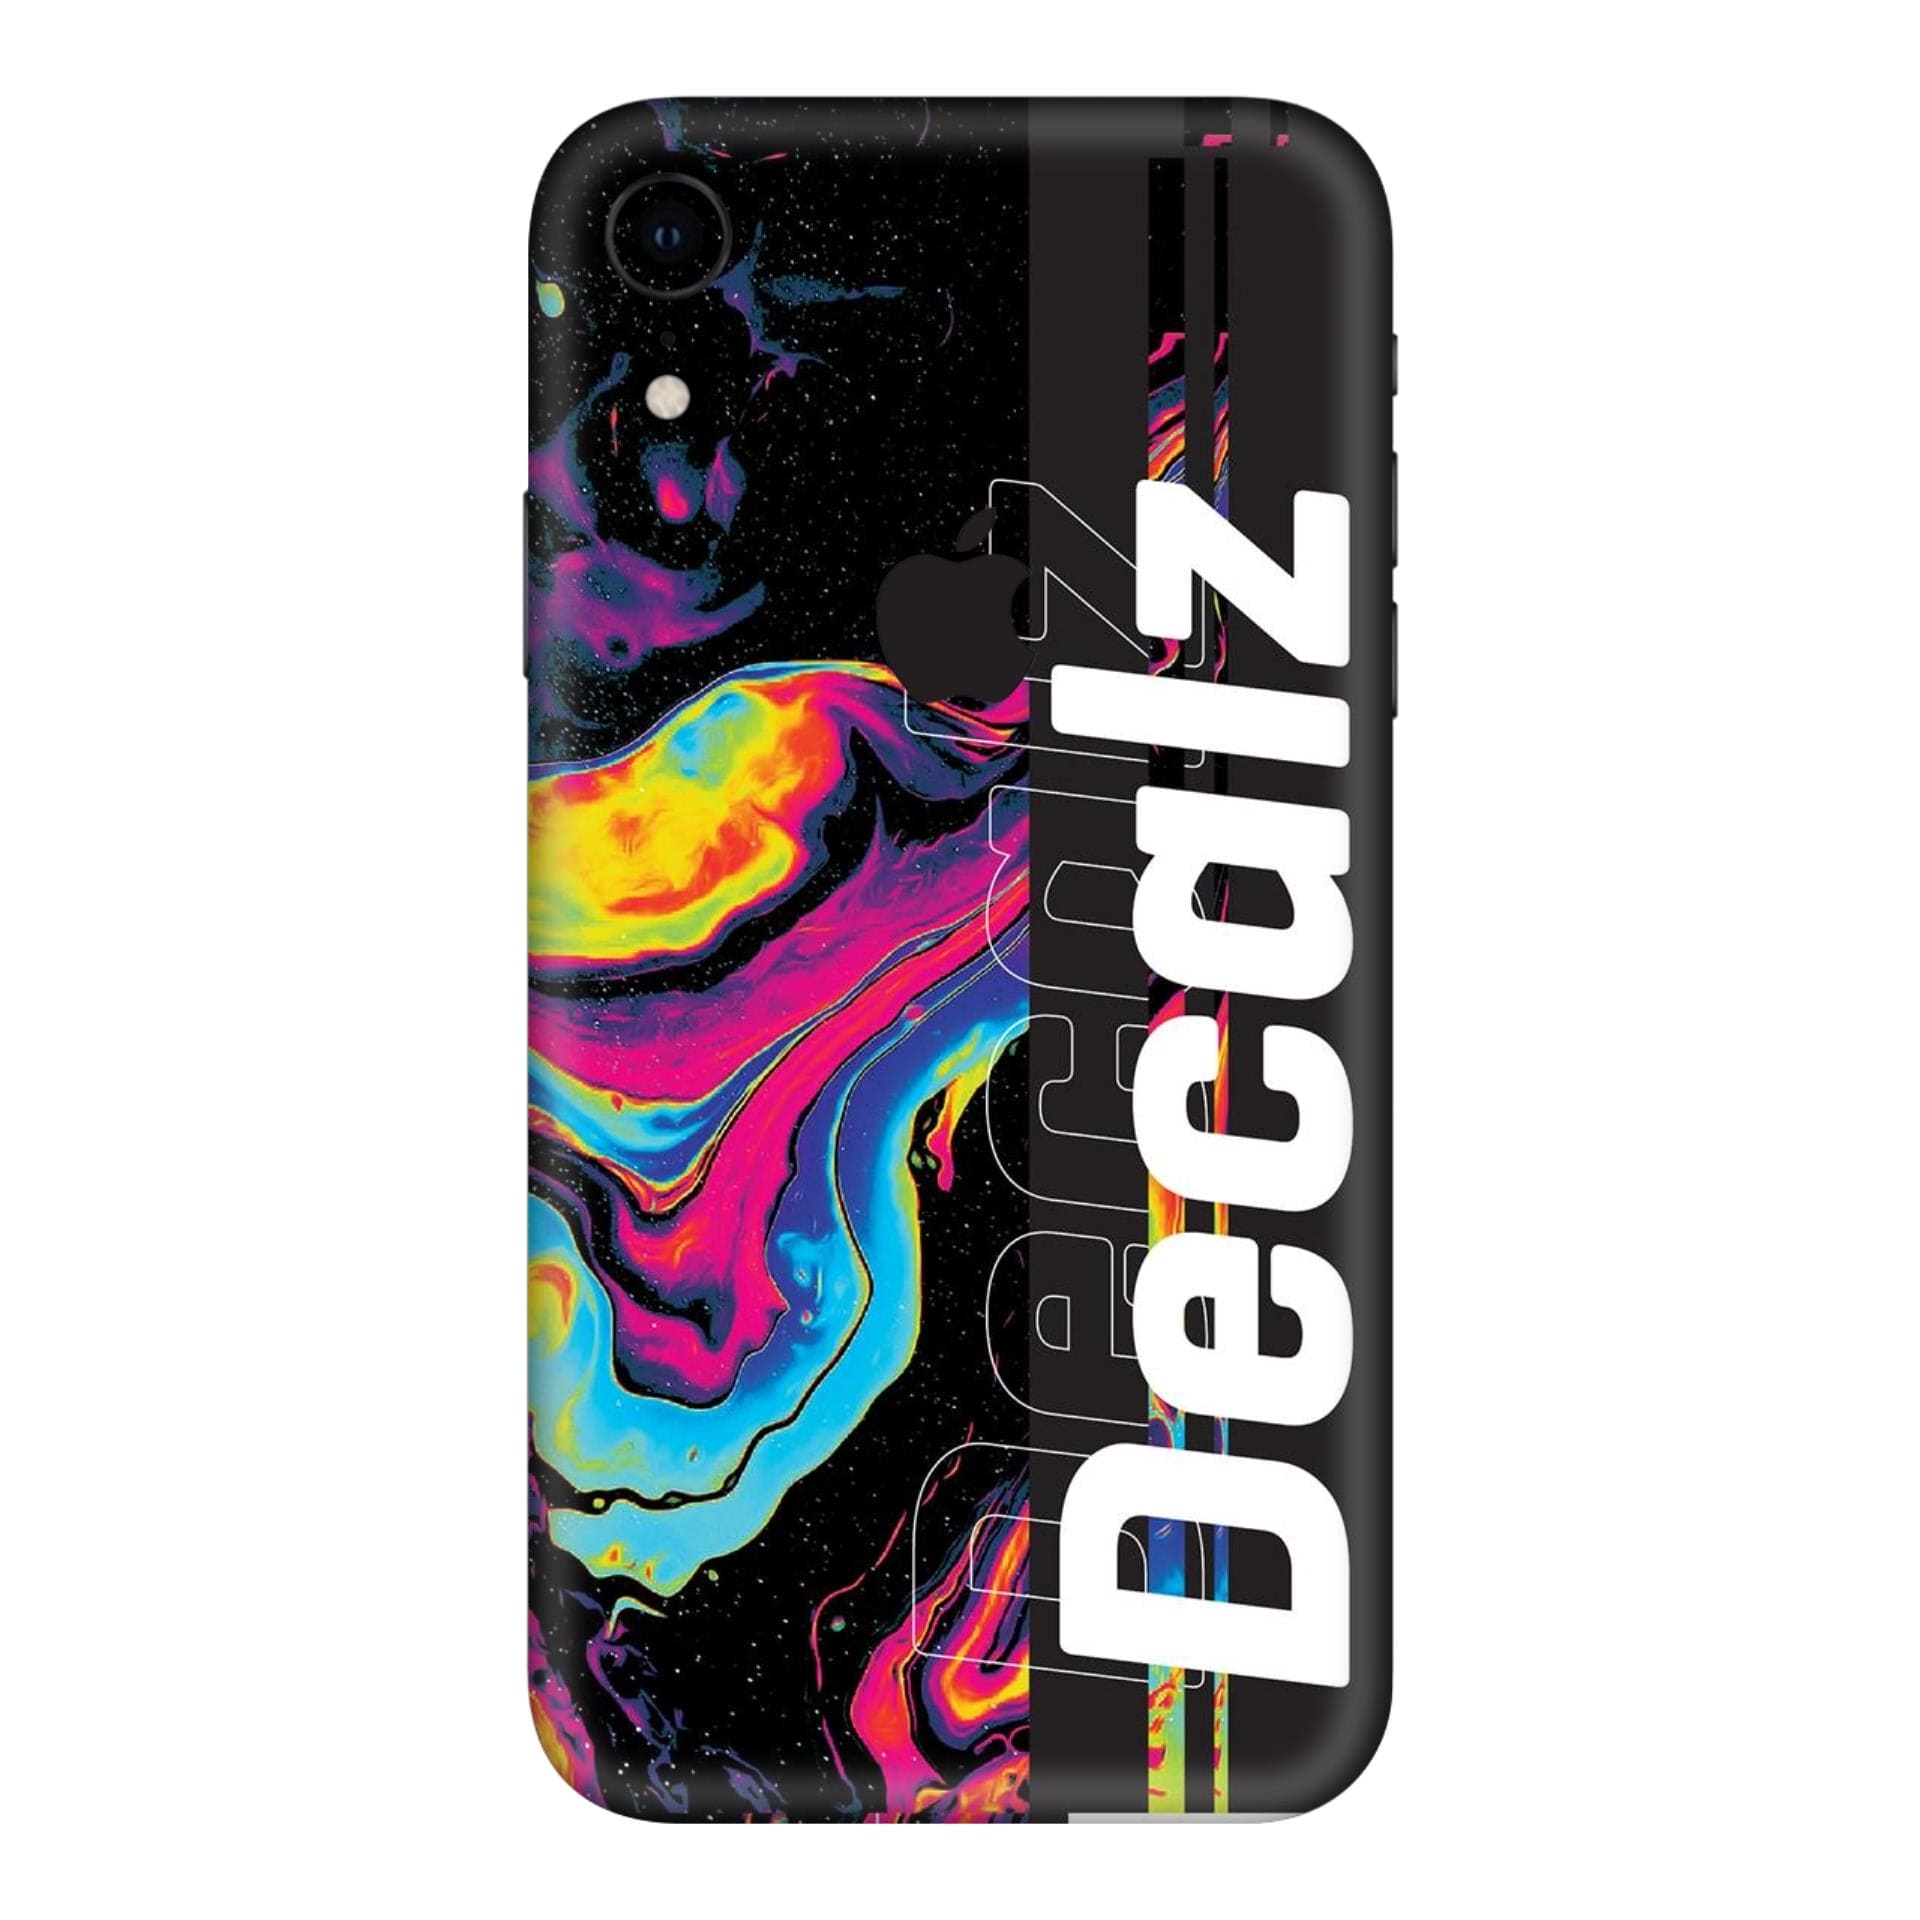 iphone XR Decalz skins